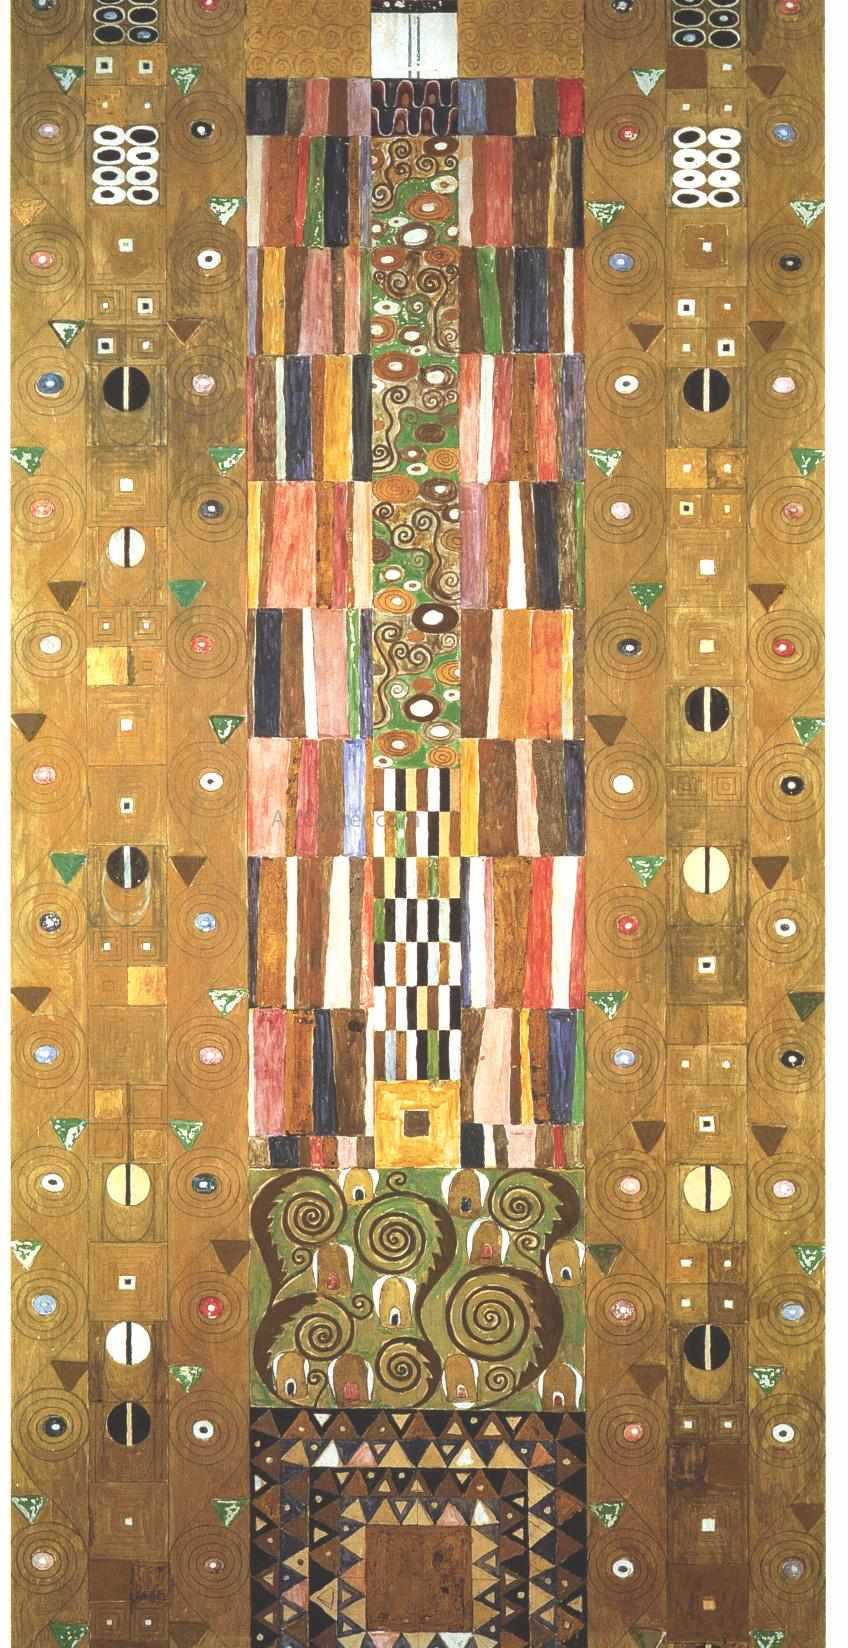  Gustav Klimt Design for the Stocletfries - End of the wall - Hand Painted Oil Painting